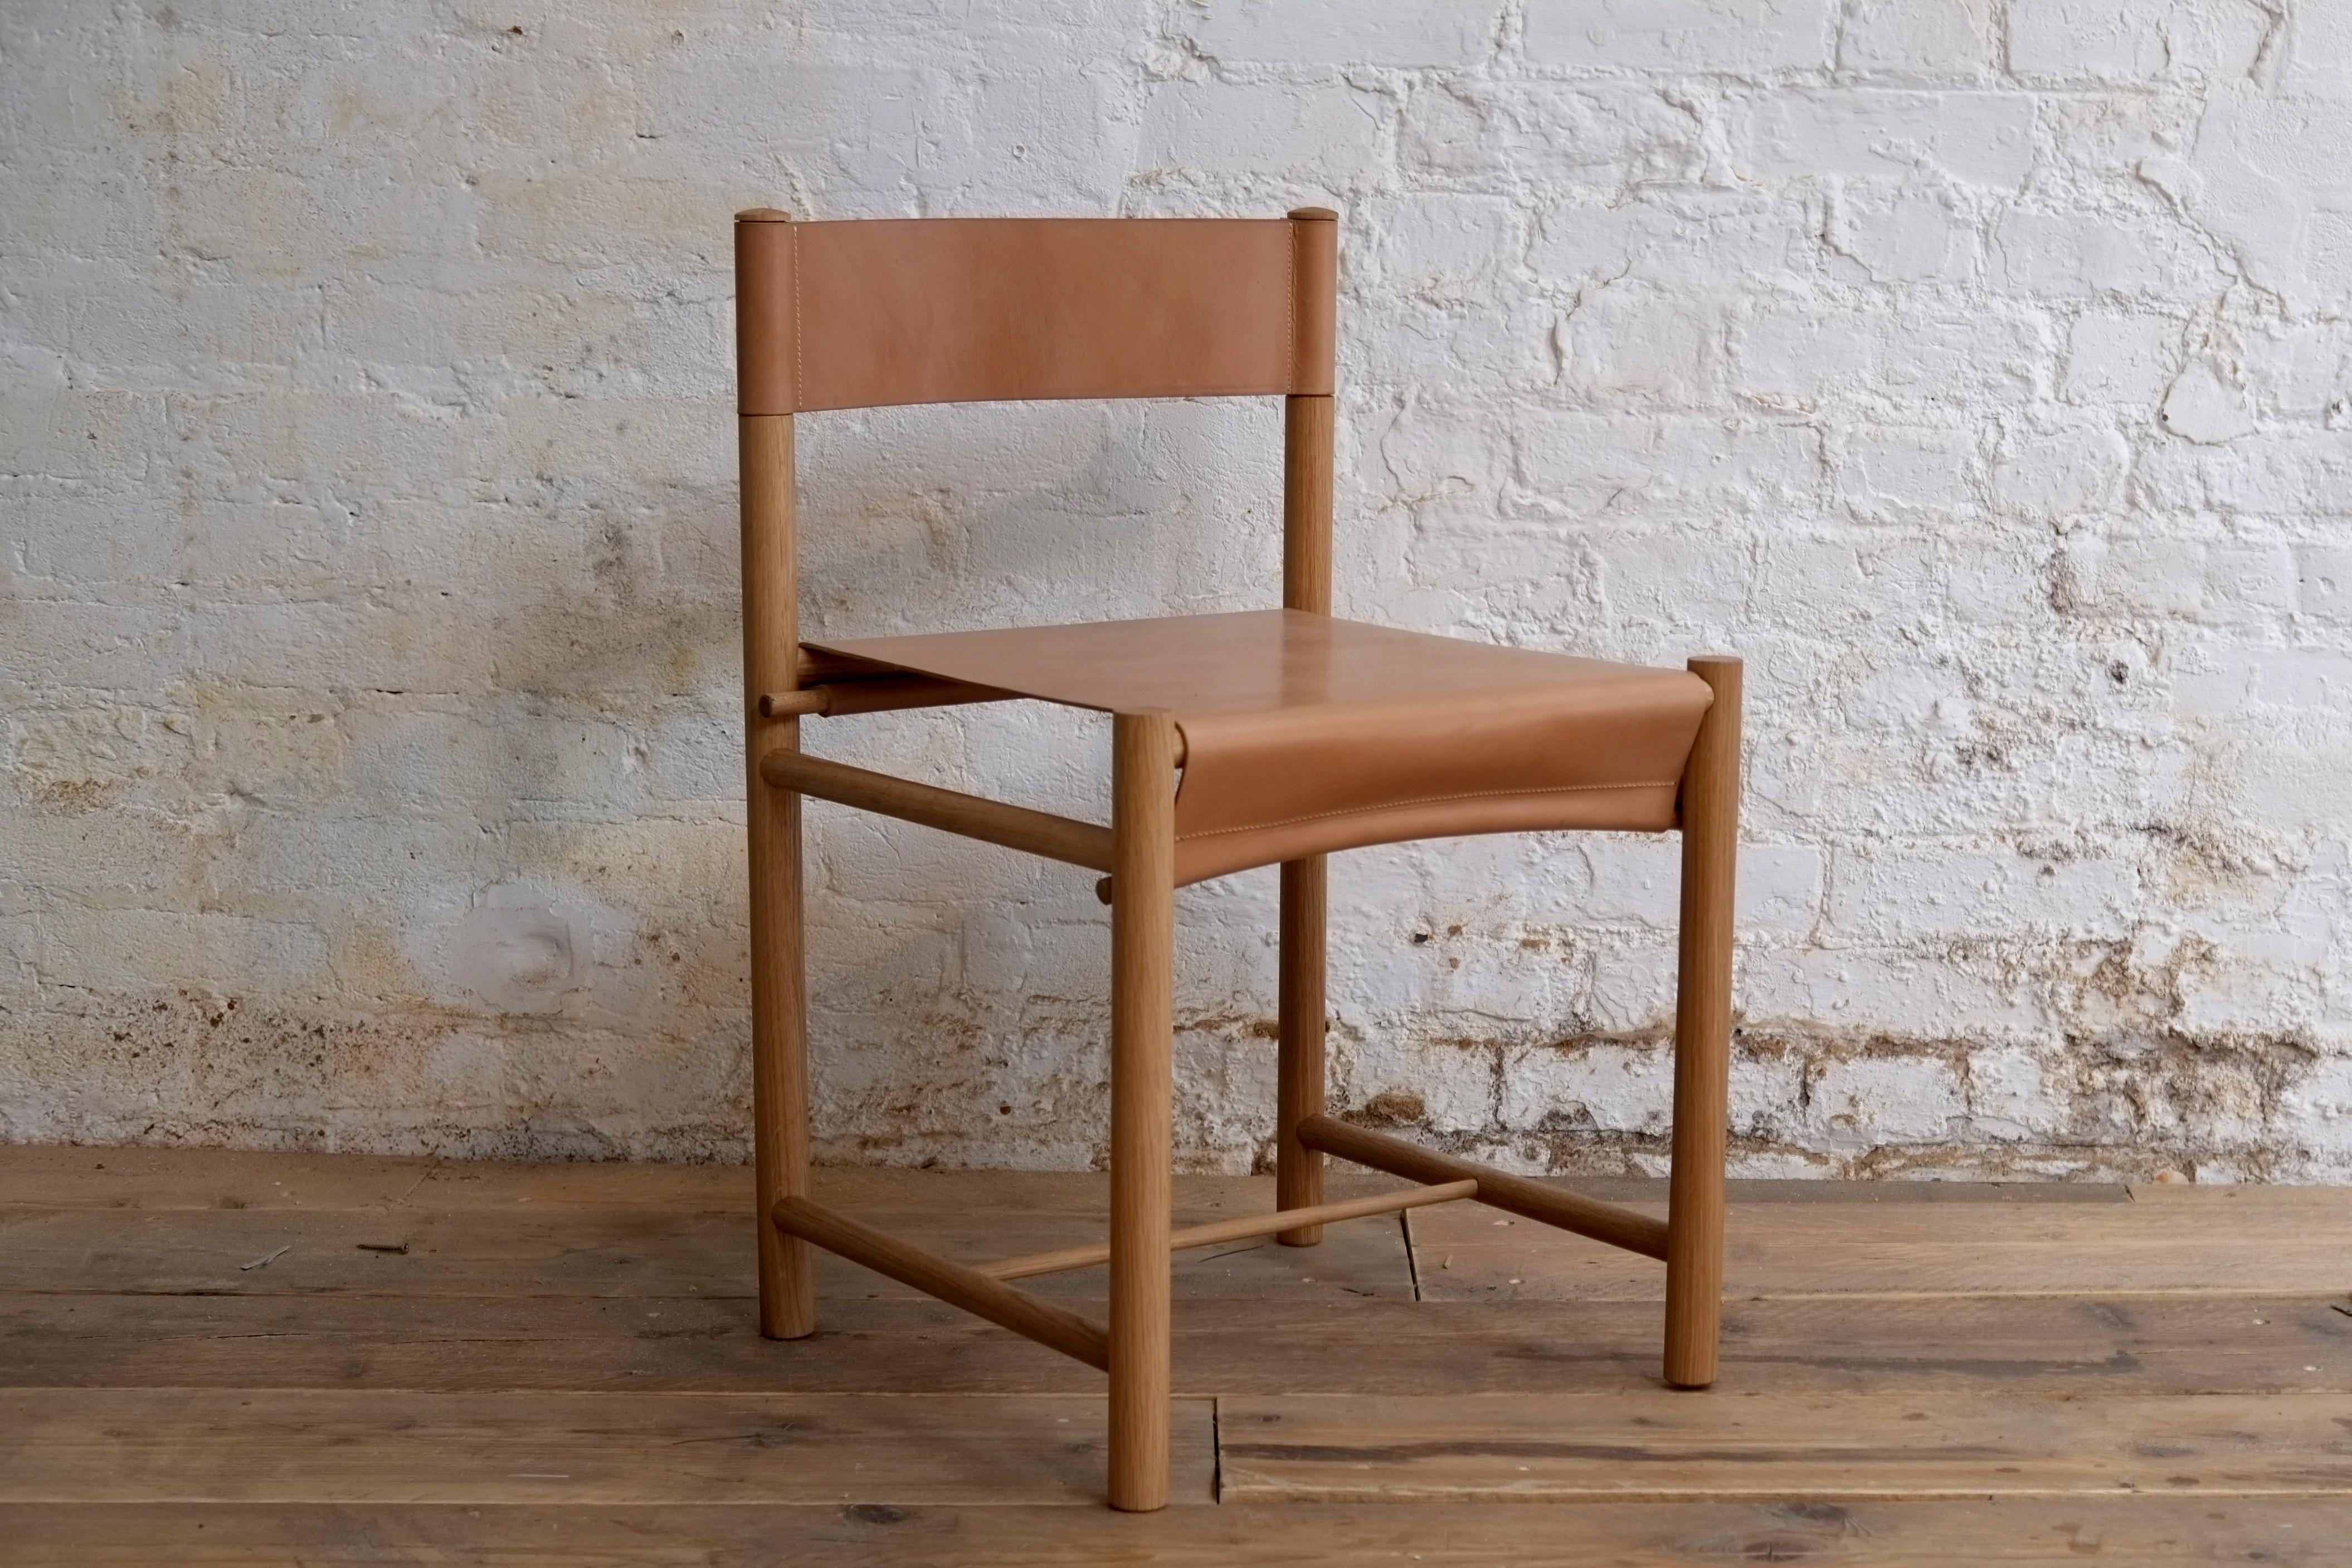 Natural loop chair by Fred Rigby Studio.
Dimensions: D 45 x W 45 x H 74 cm.
Materials: oak wood, leather.
Available in natural or black oak.

The Loop Chair is a celebration of simplicity, taking inspiration from ancient wooden looms and how